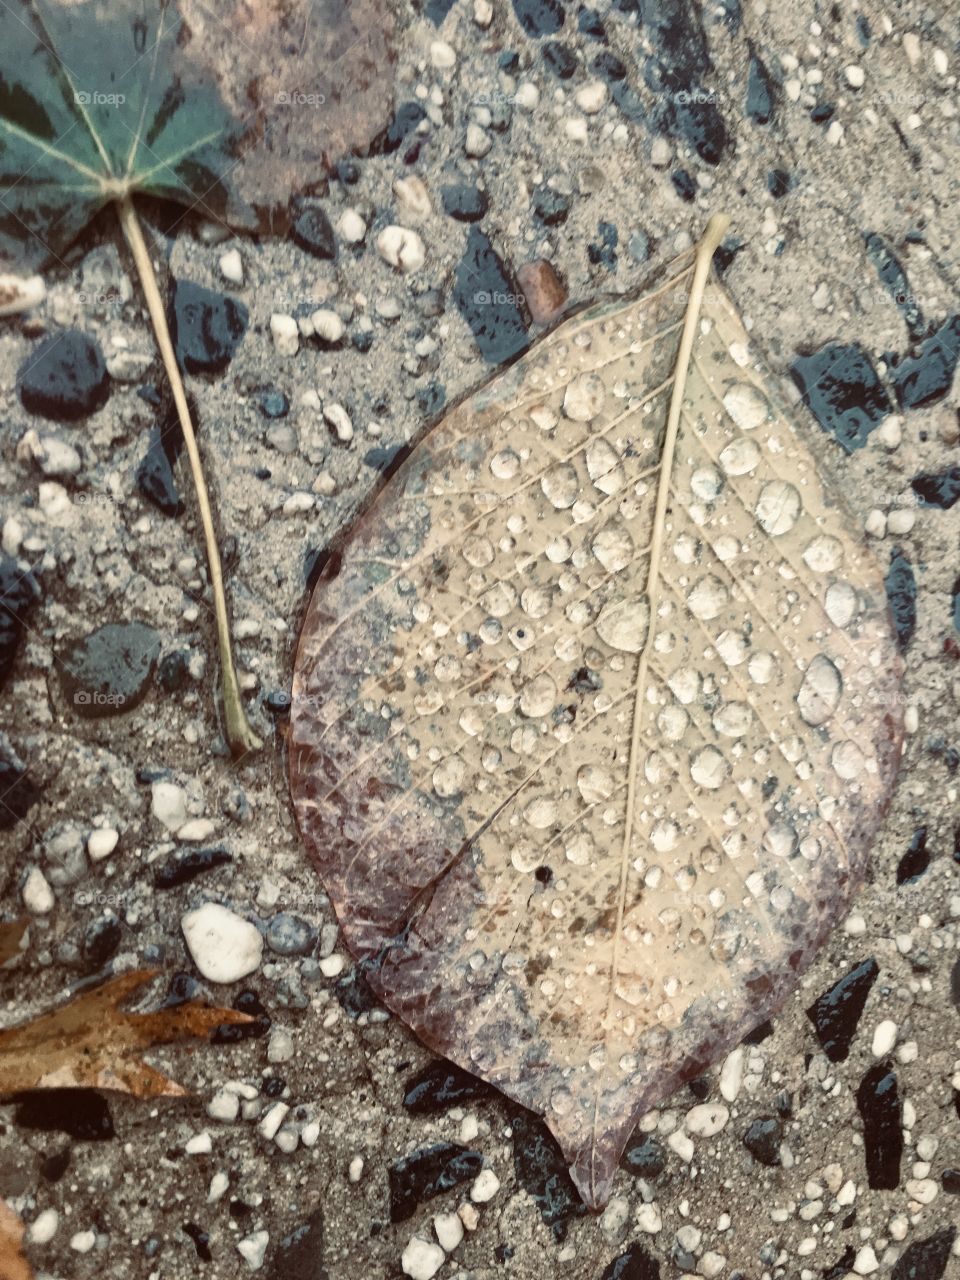 Raindrops rest on a leaf